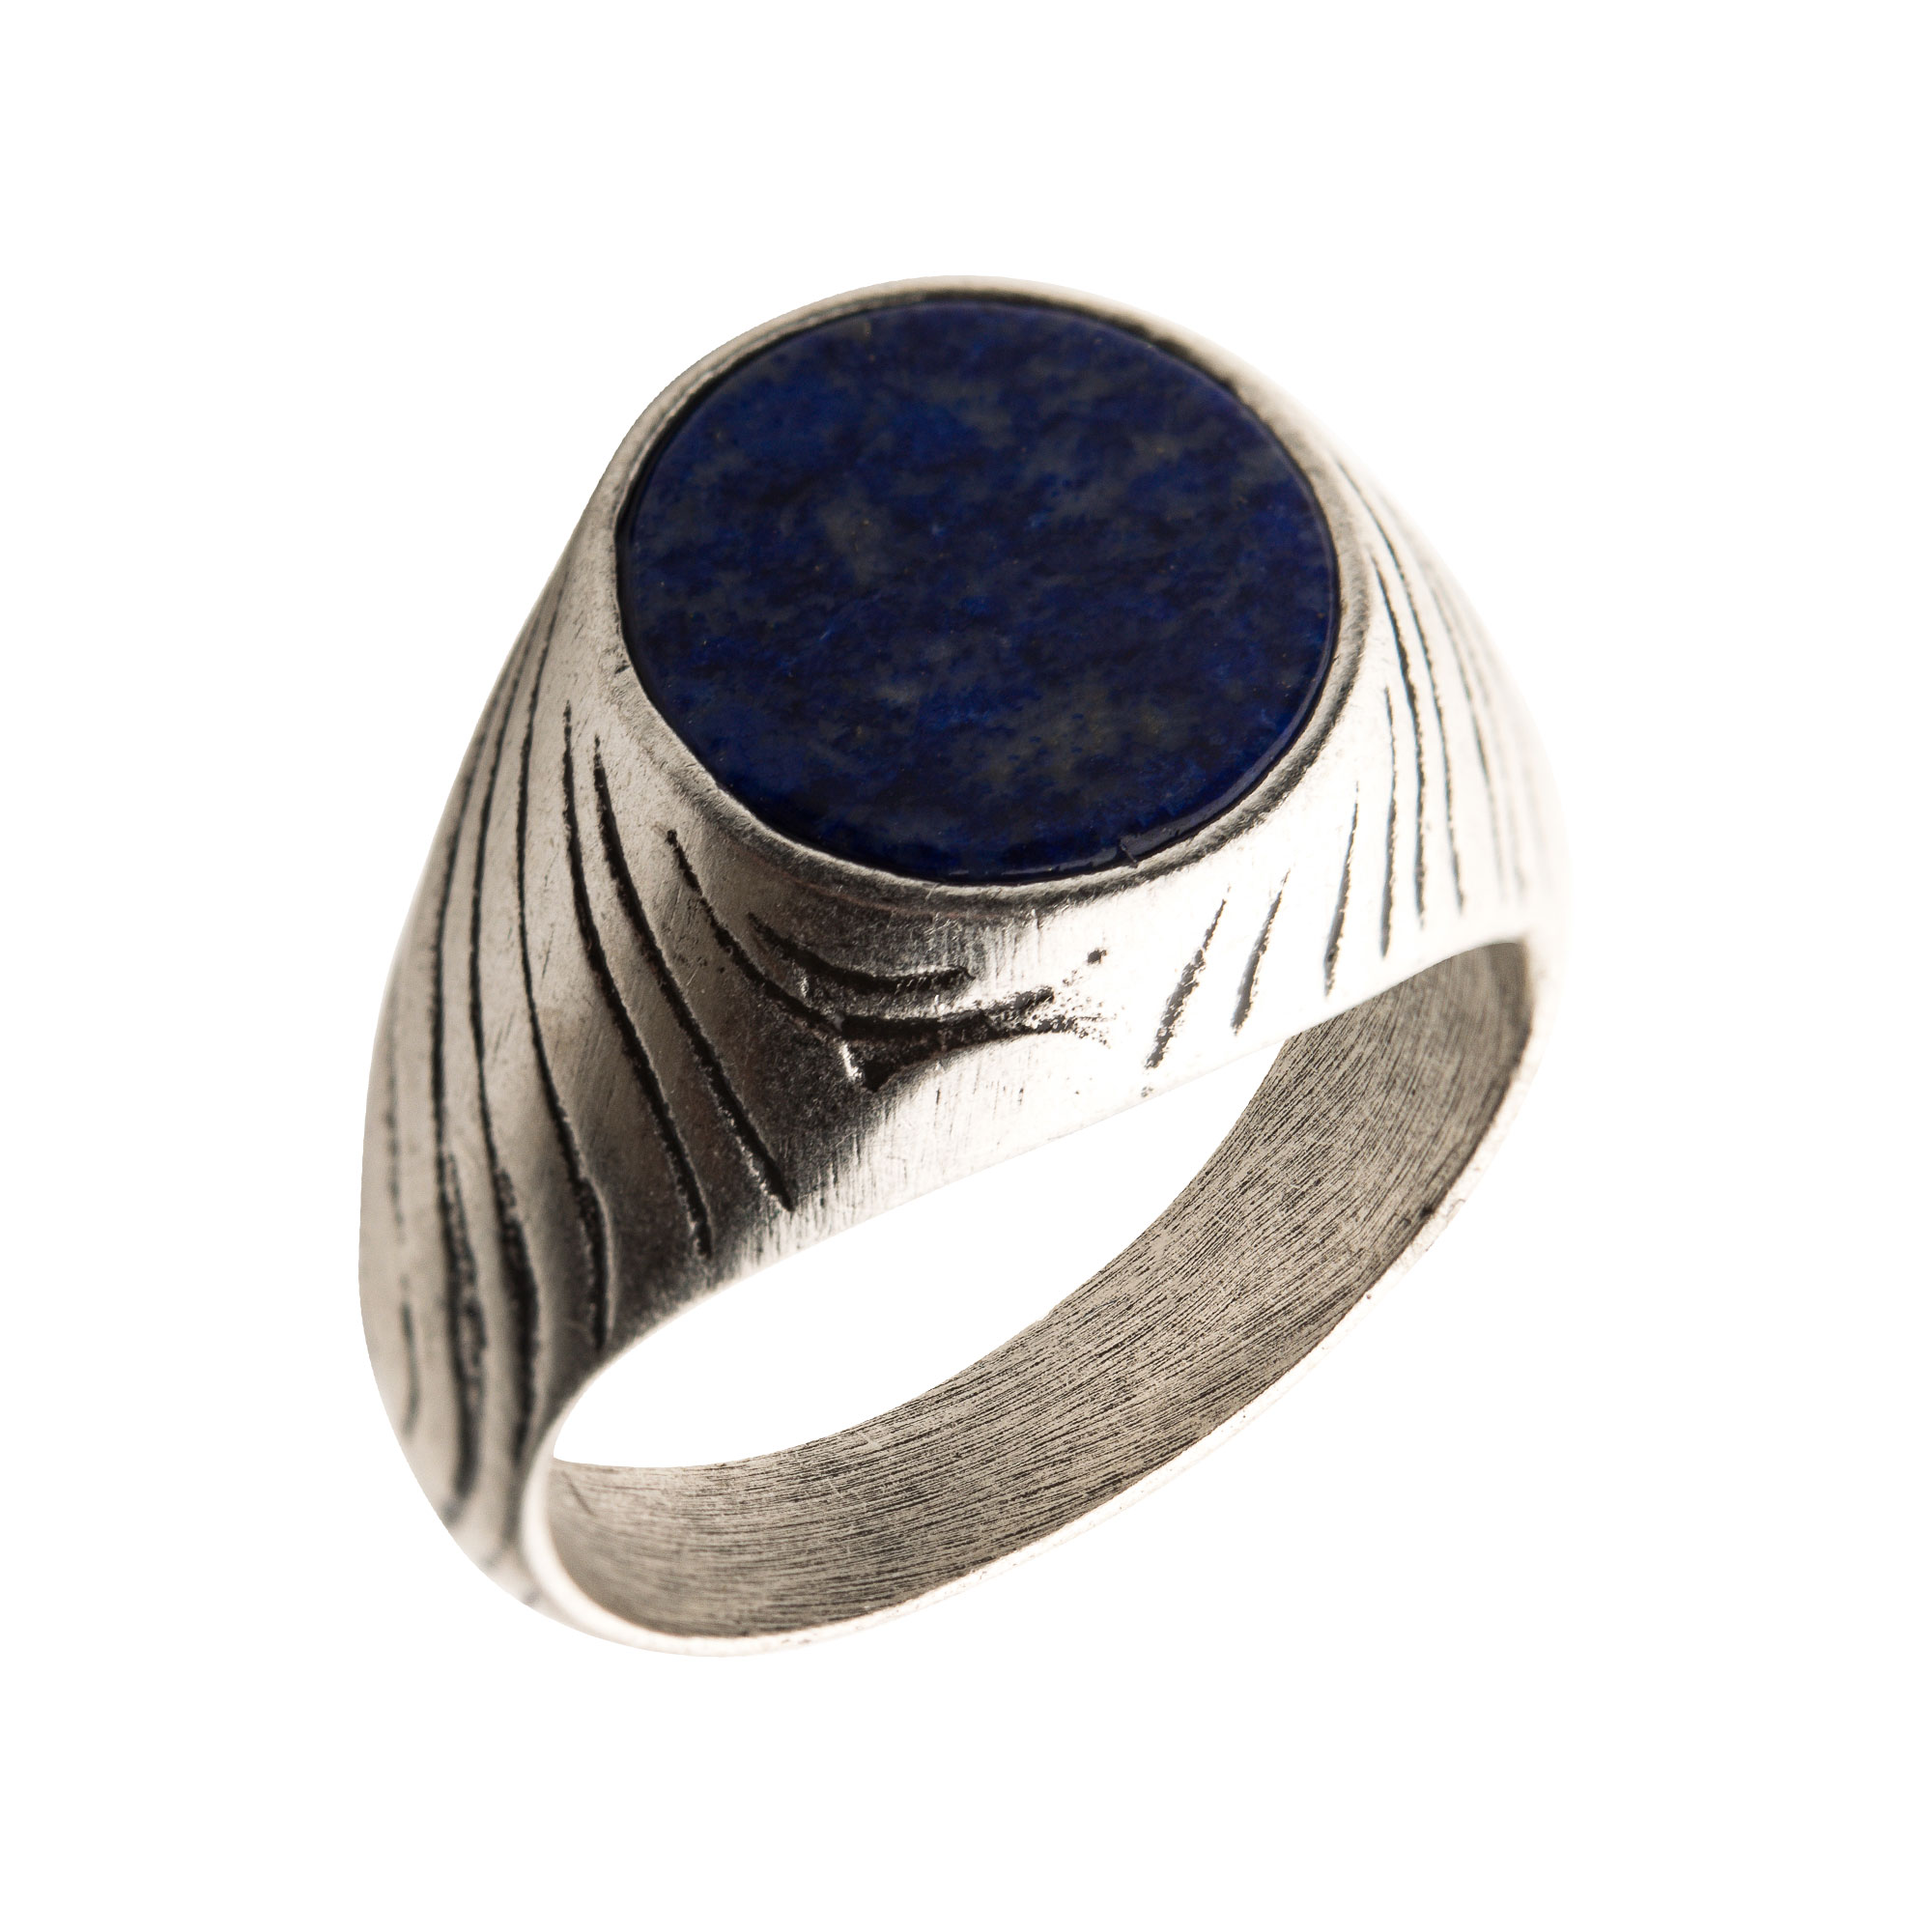 Stainless Steel Silver Plated with Lapis Stone Ring Midtown Diamonds Reno, NV